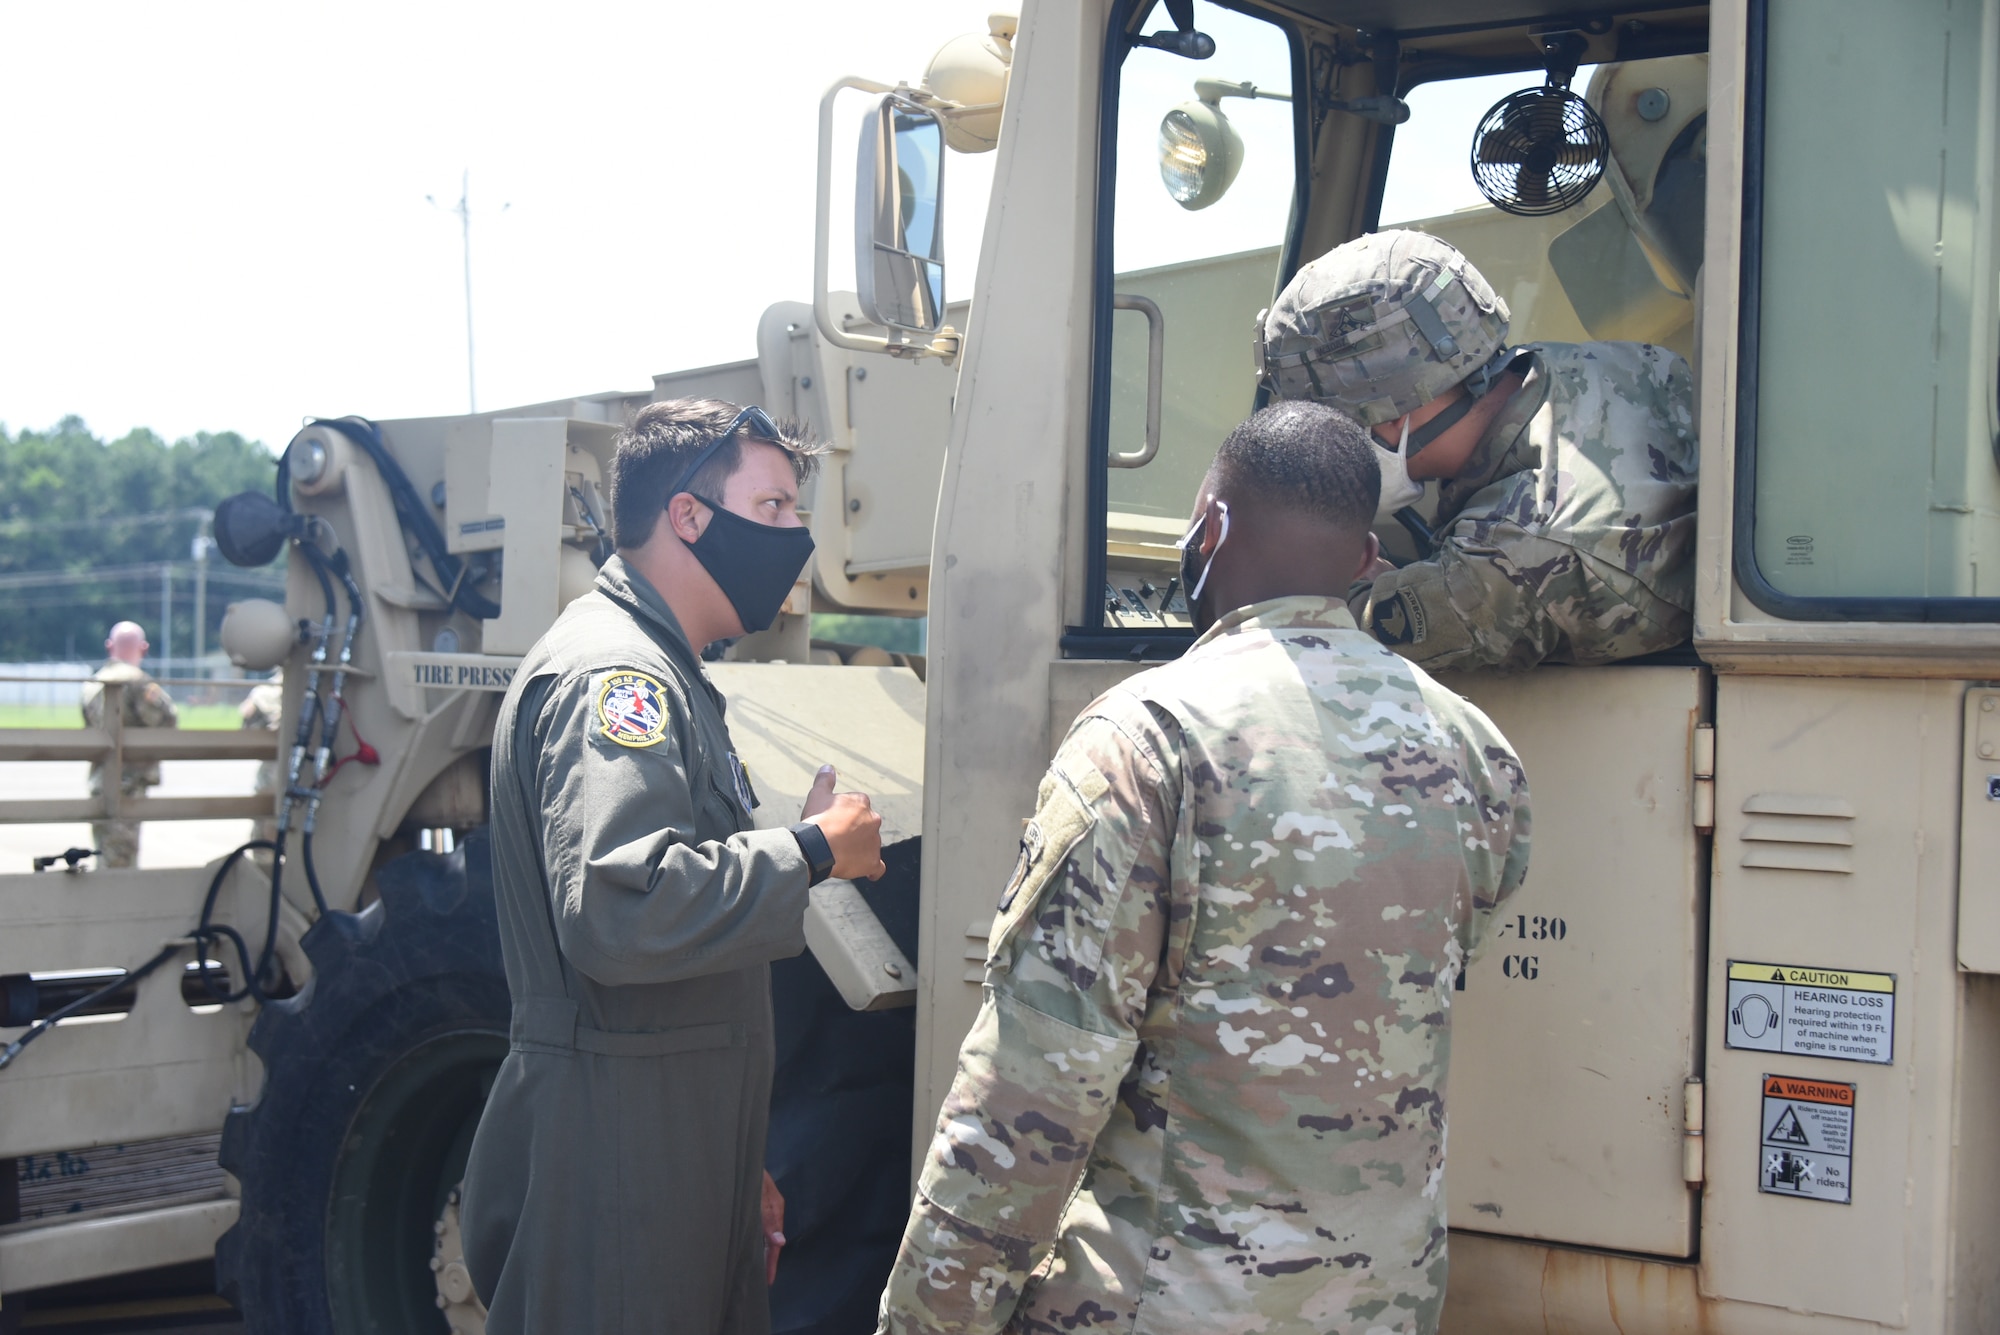 164th provides airframe for training